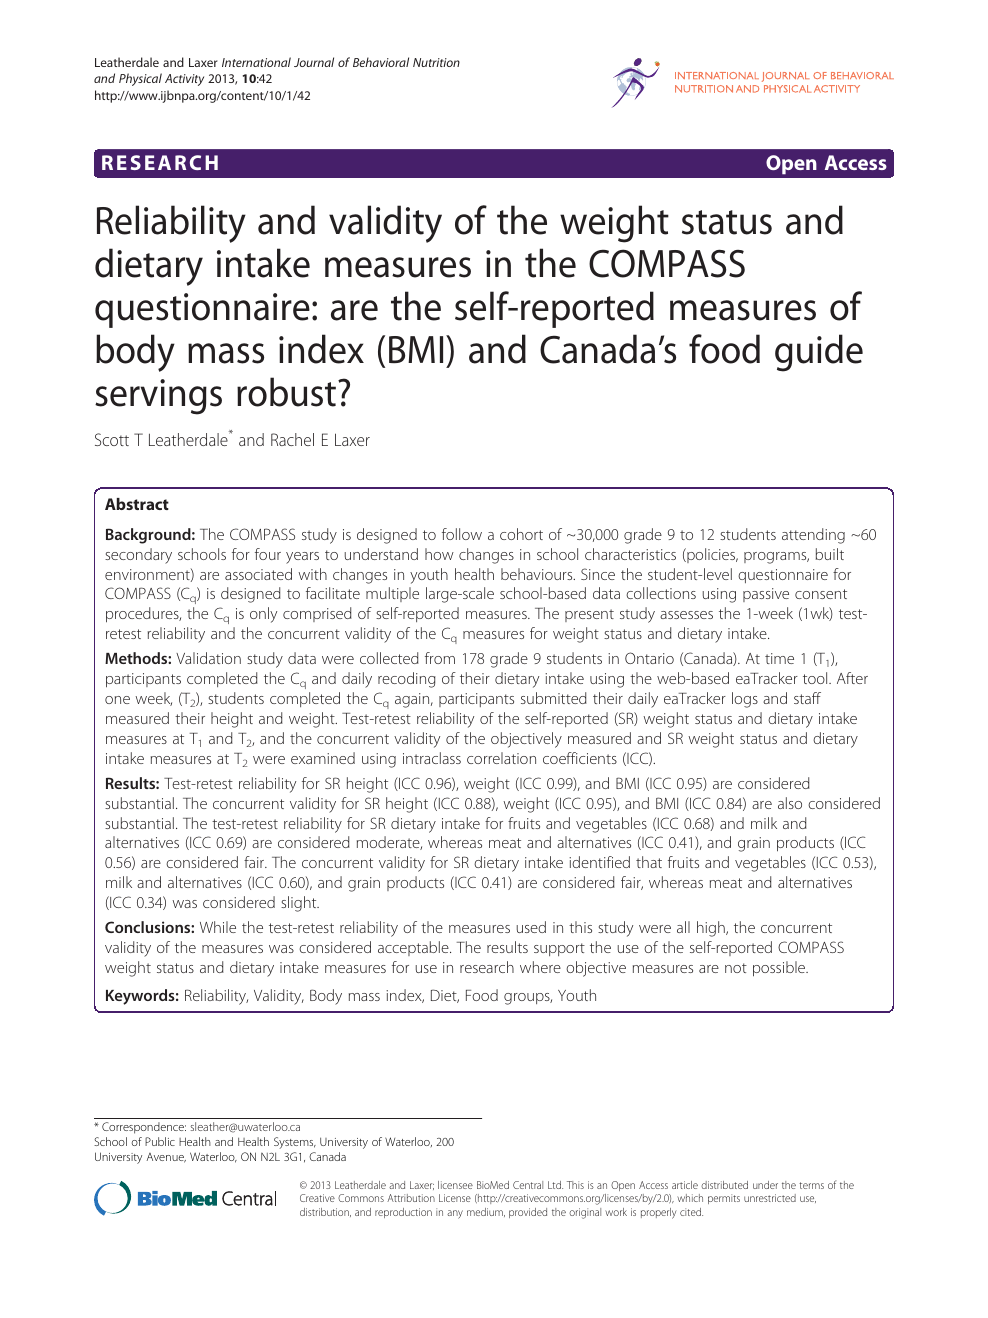 patrulla Borradura Excesivo Reliability and validity of the weight status and dietary intake measures  in the COMPASS questionnaire: are the self-reported measures of body mass  index (BMI) and Canada's food guide servings robust? – topic